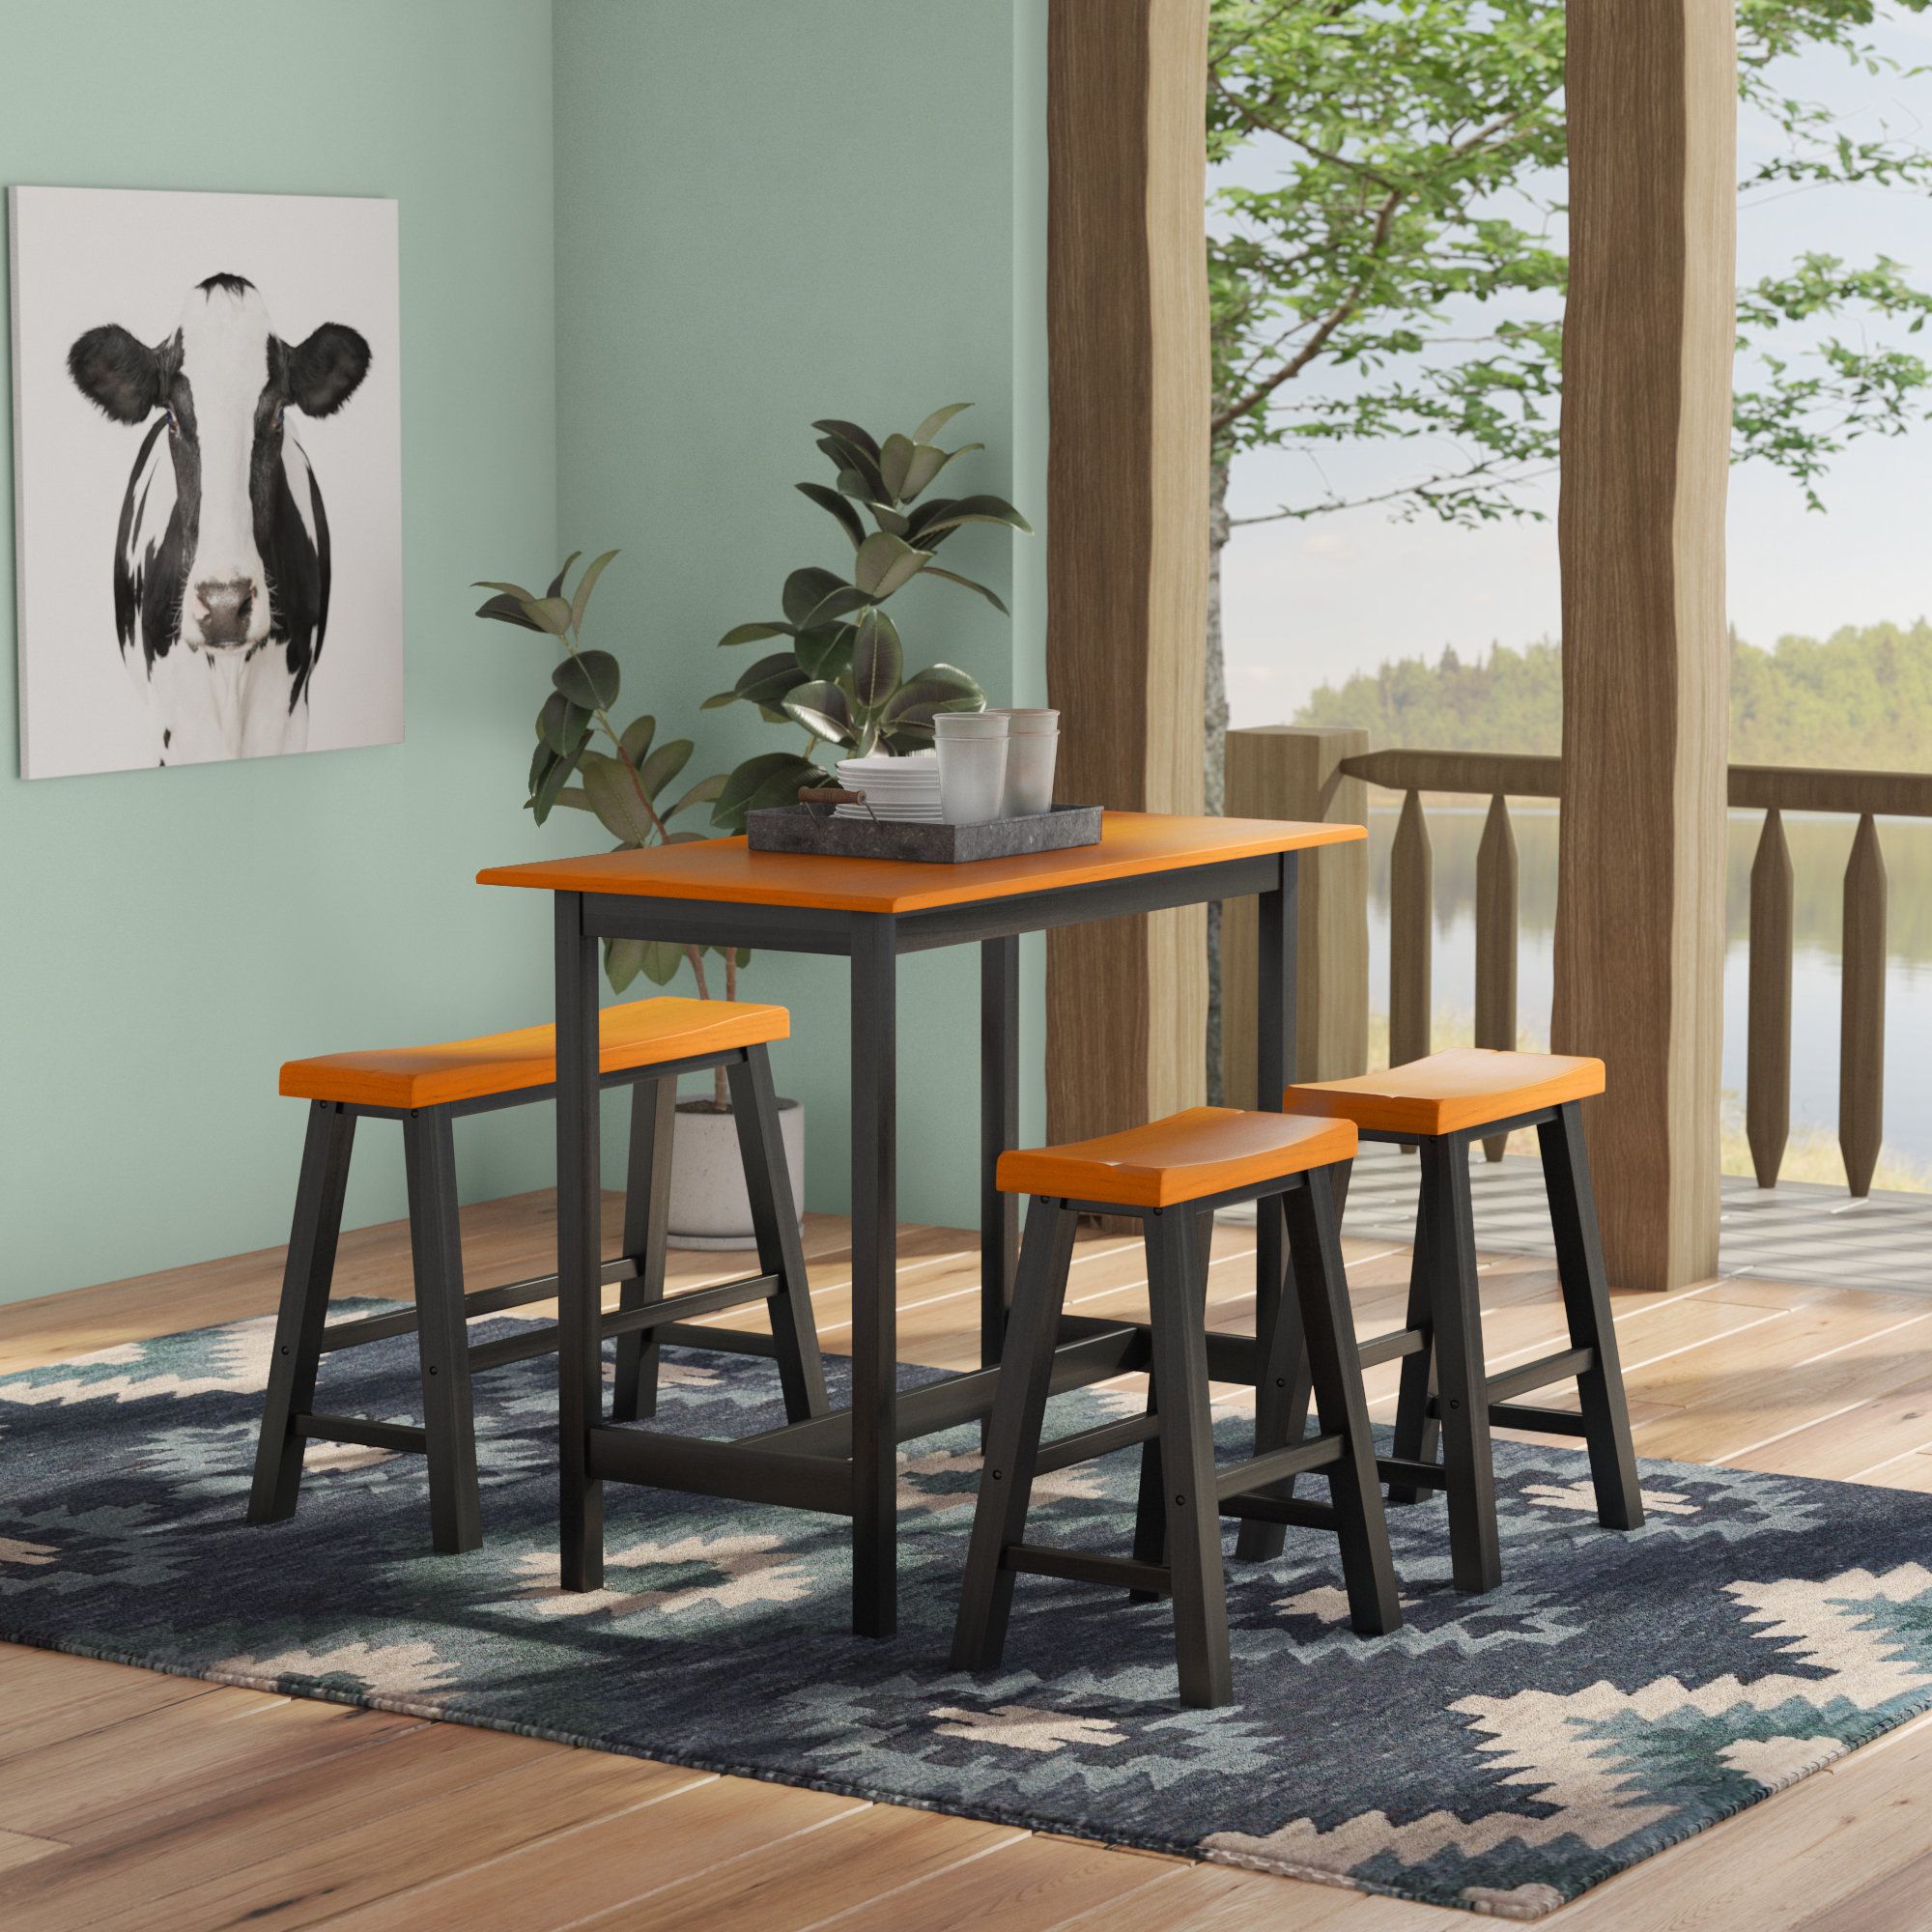 Trendy Kerley 4 Piece Solid Wood Dining Set Pertaining To Kerley 4 Piece Dining Sets (View 1 of 20)